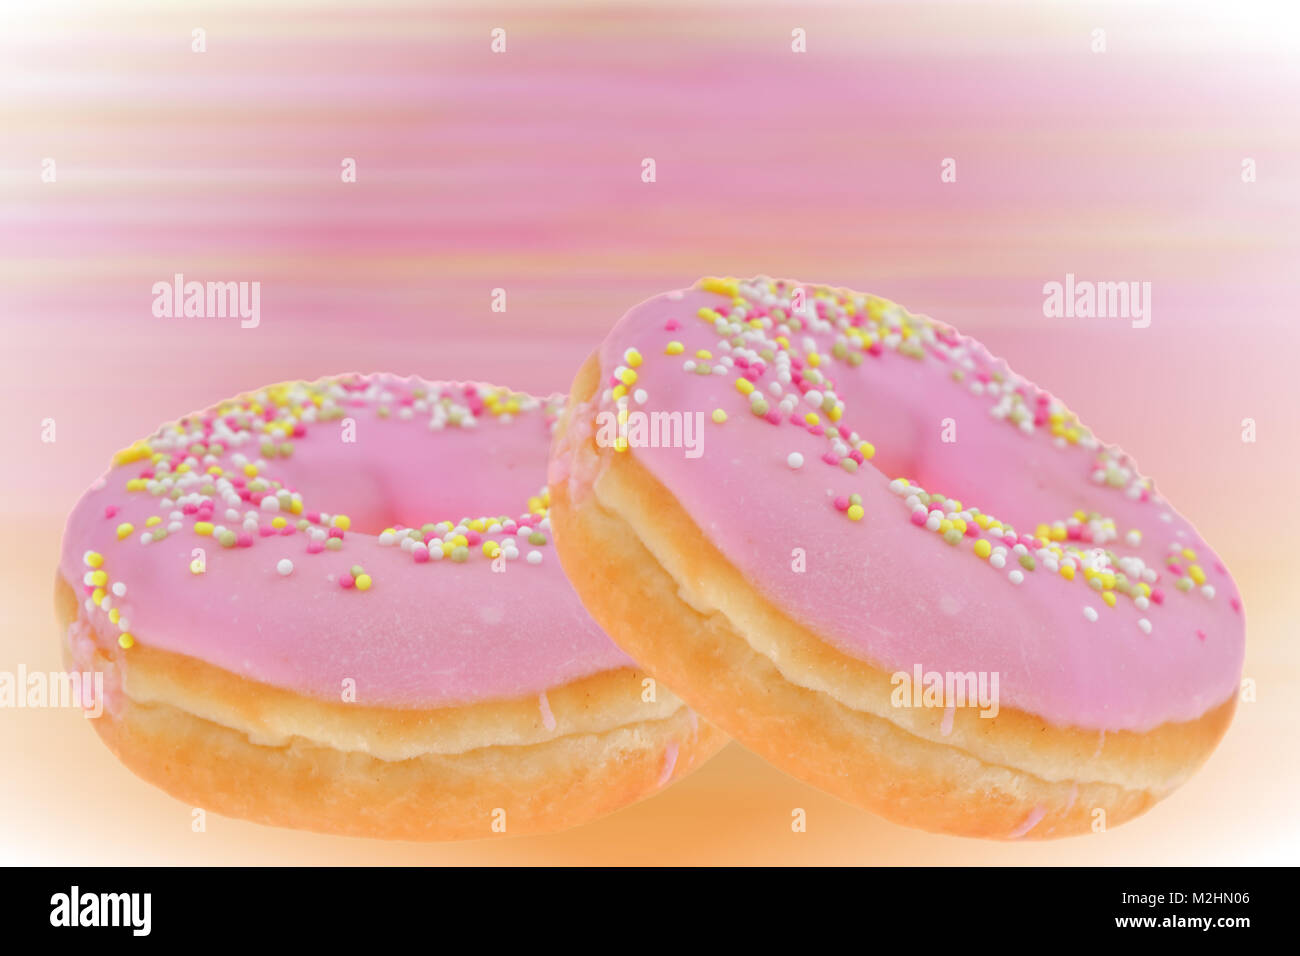 Donuts are the most wonderful sweet you can imagine for a second breakfast. Stock Photo